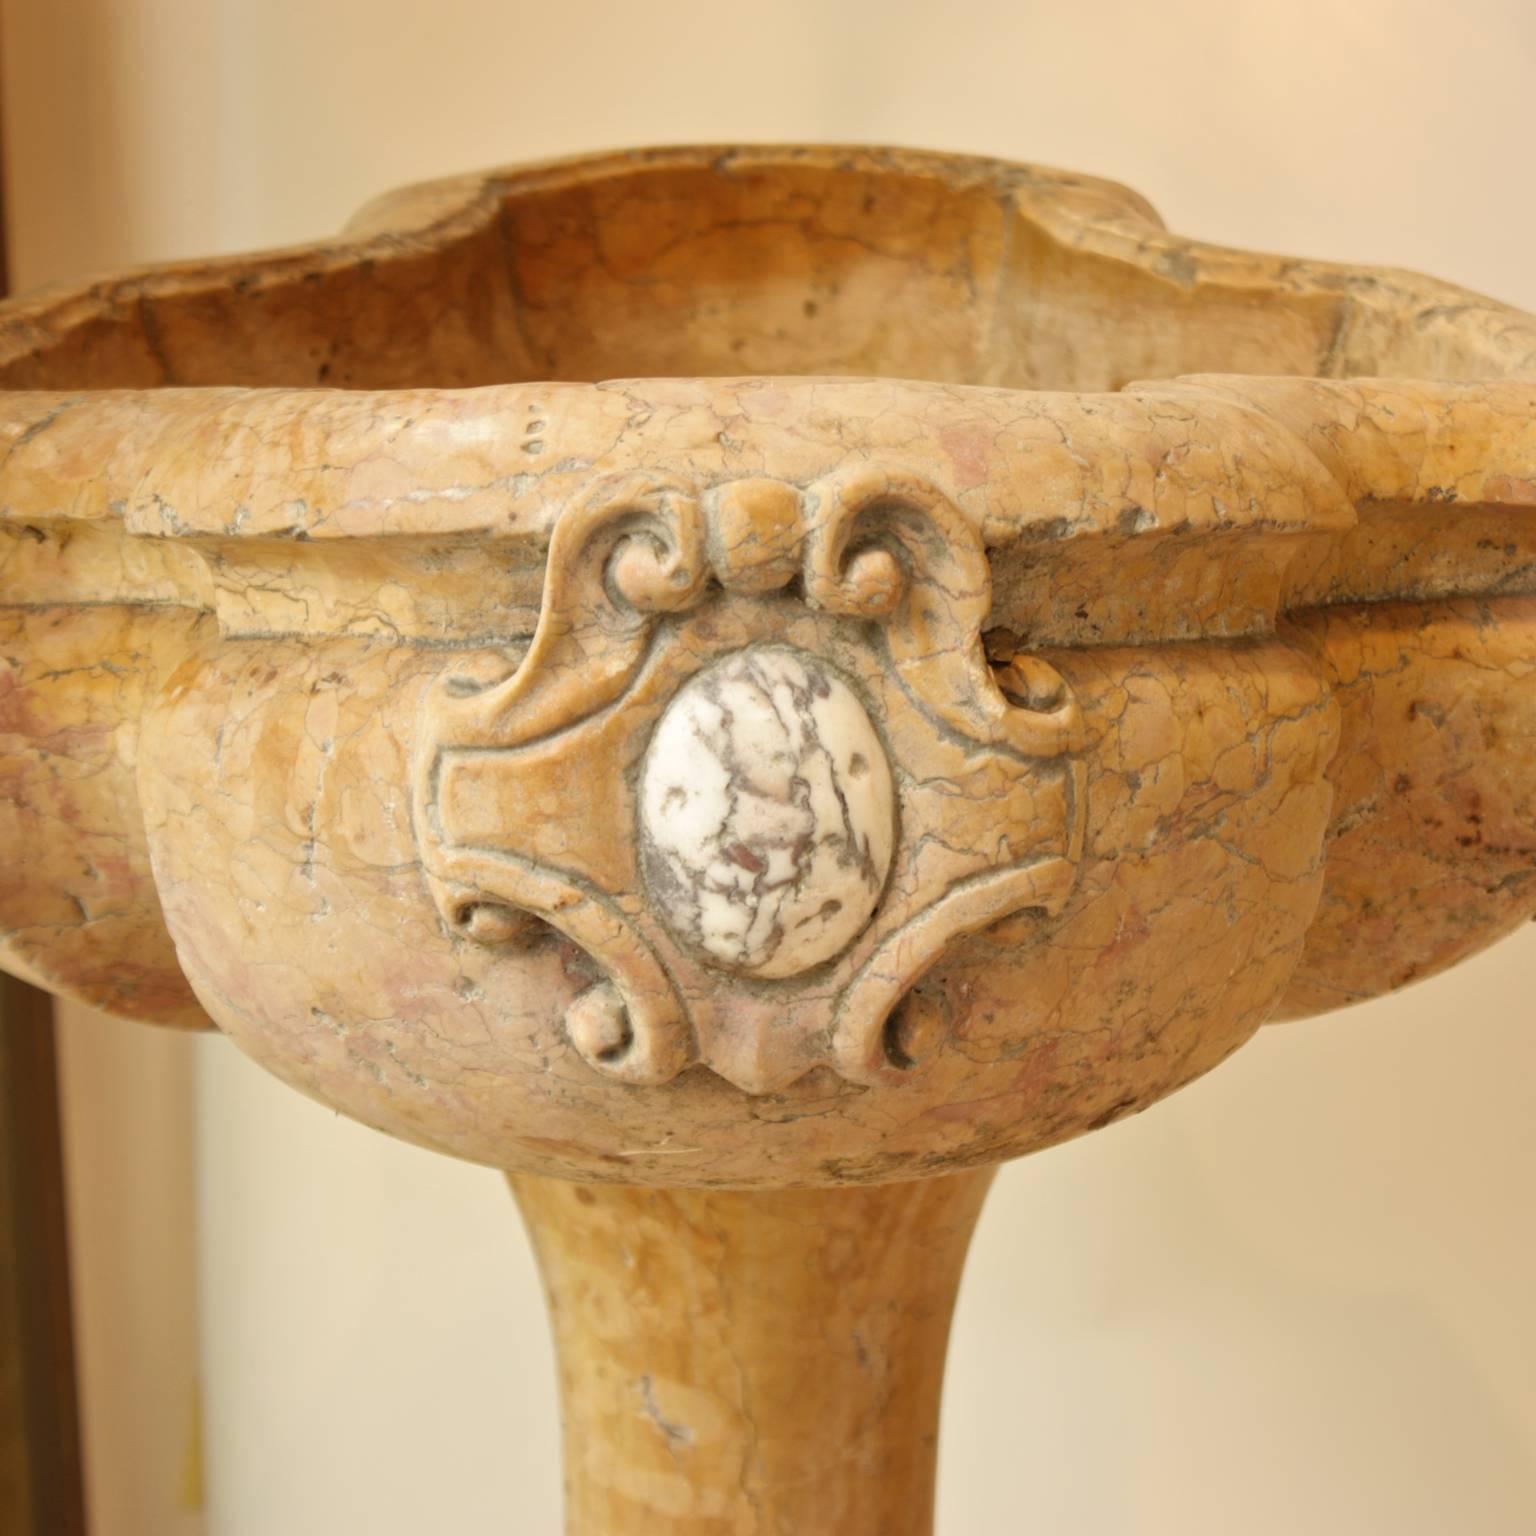 A large and impressive marble Jardinière with a flat multi-lobed basin with neck and flared rim, with cartouches surrounding an oval white and grey marble egg motif at either end of the basin, raised on a tapering baluster finely carved with